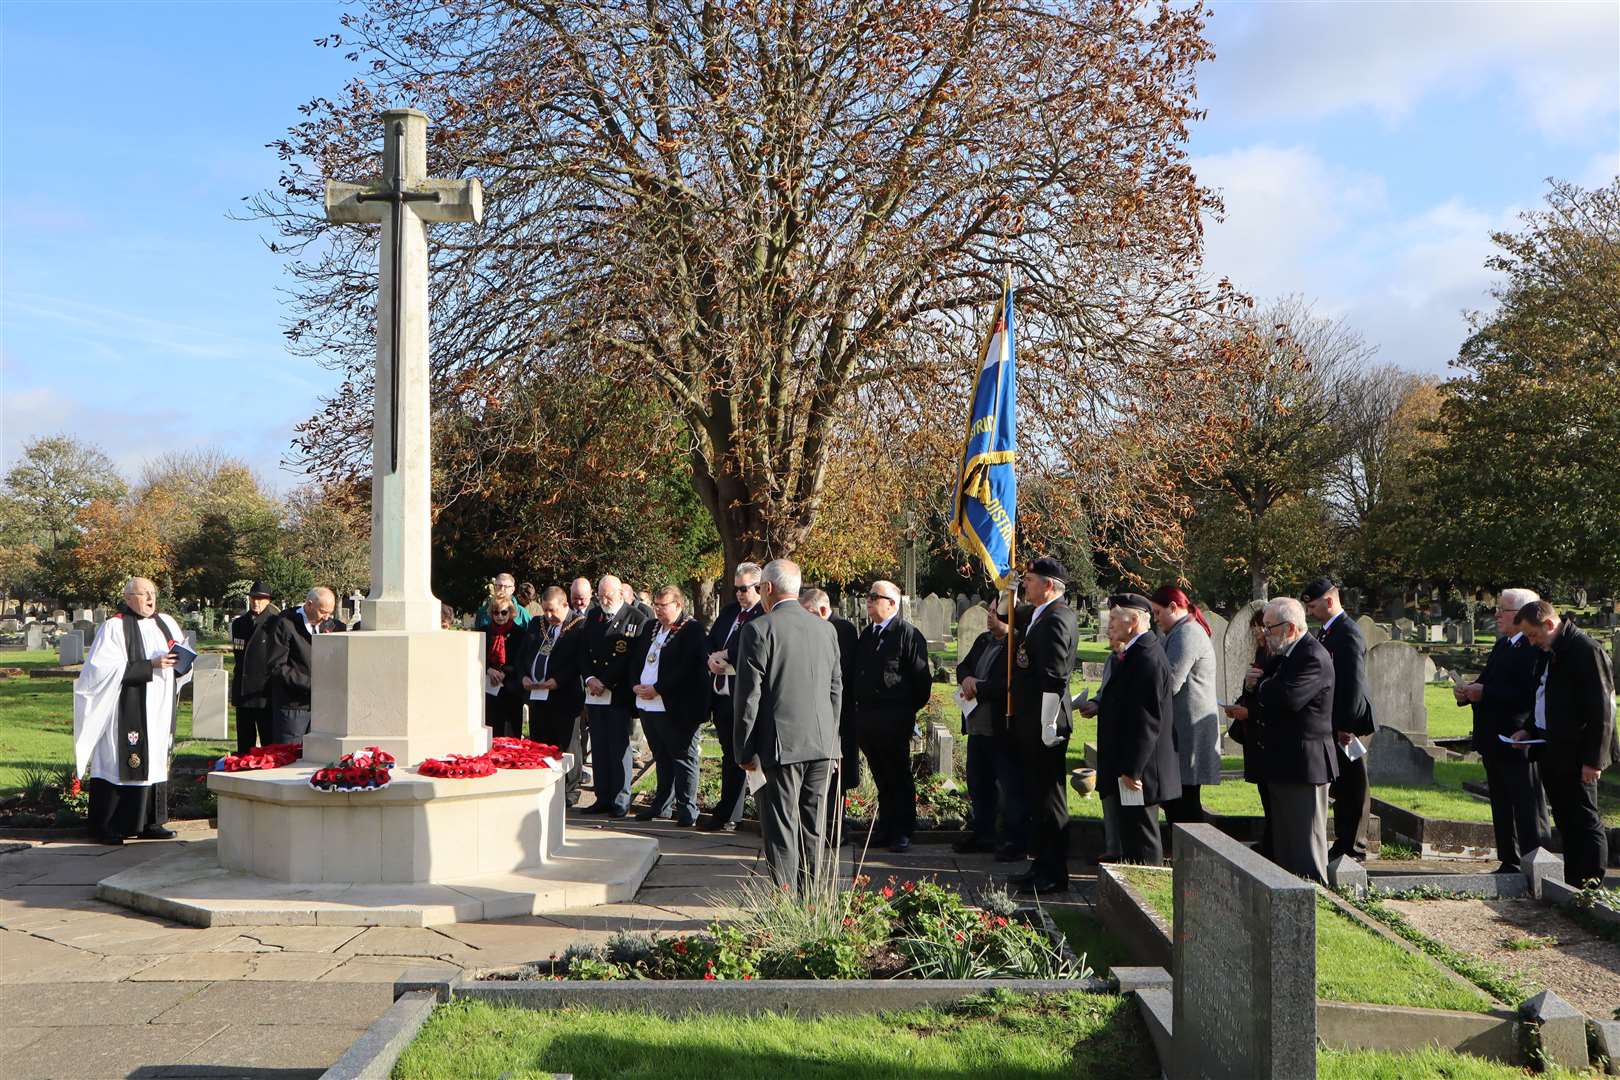 Armistice Day service in the Sheppey Cemetery, Halfway, for Remembrance Day 2022